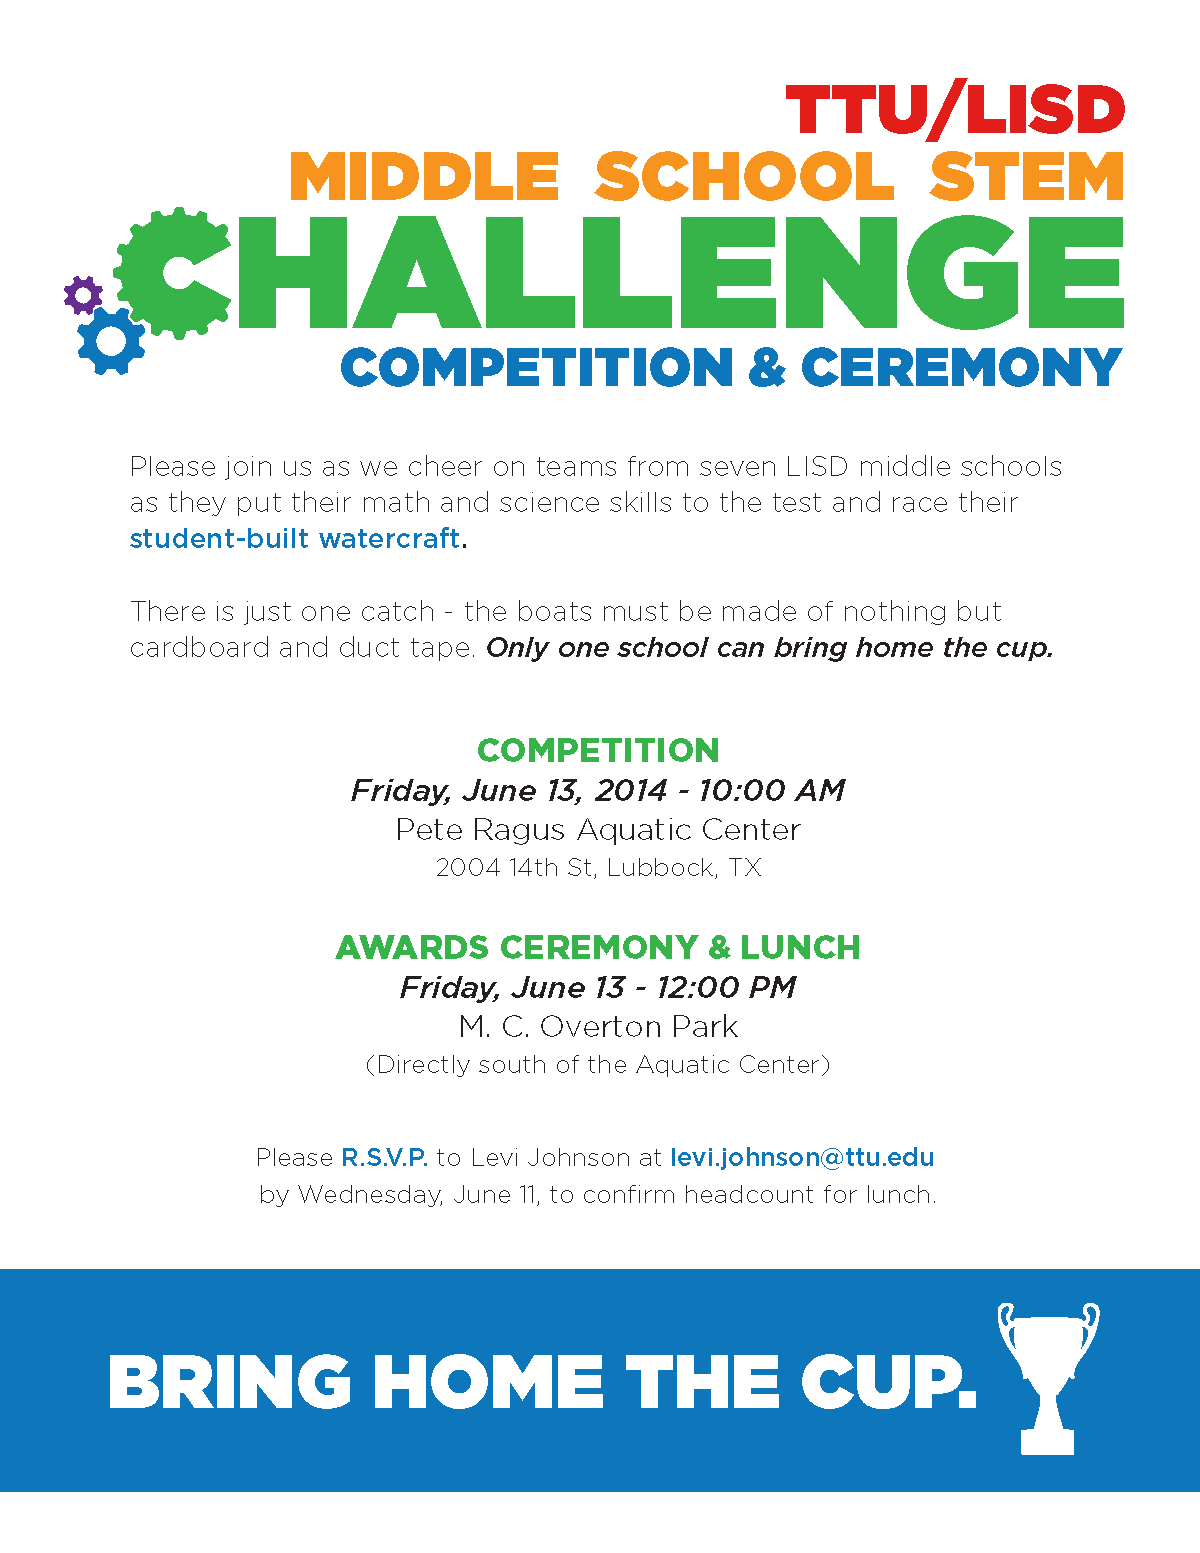 Competition and Awards Ceremony Invitation